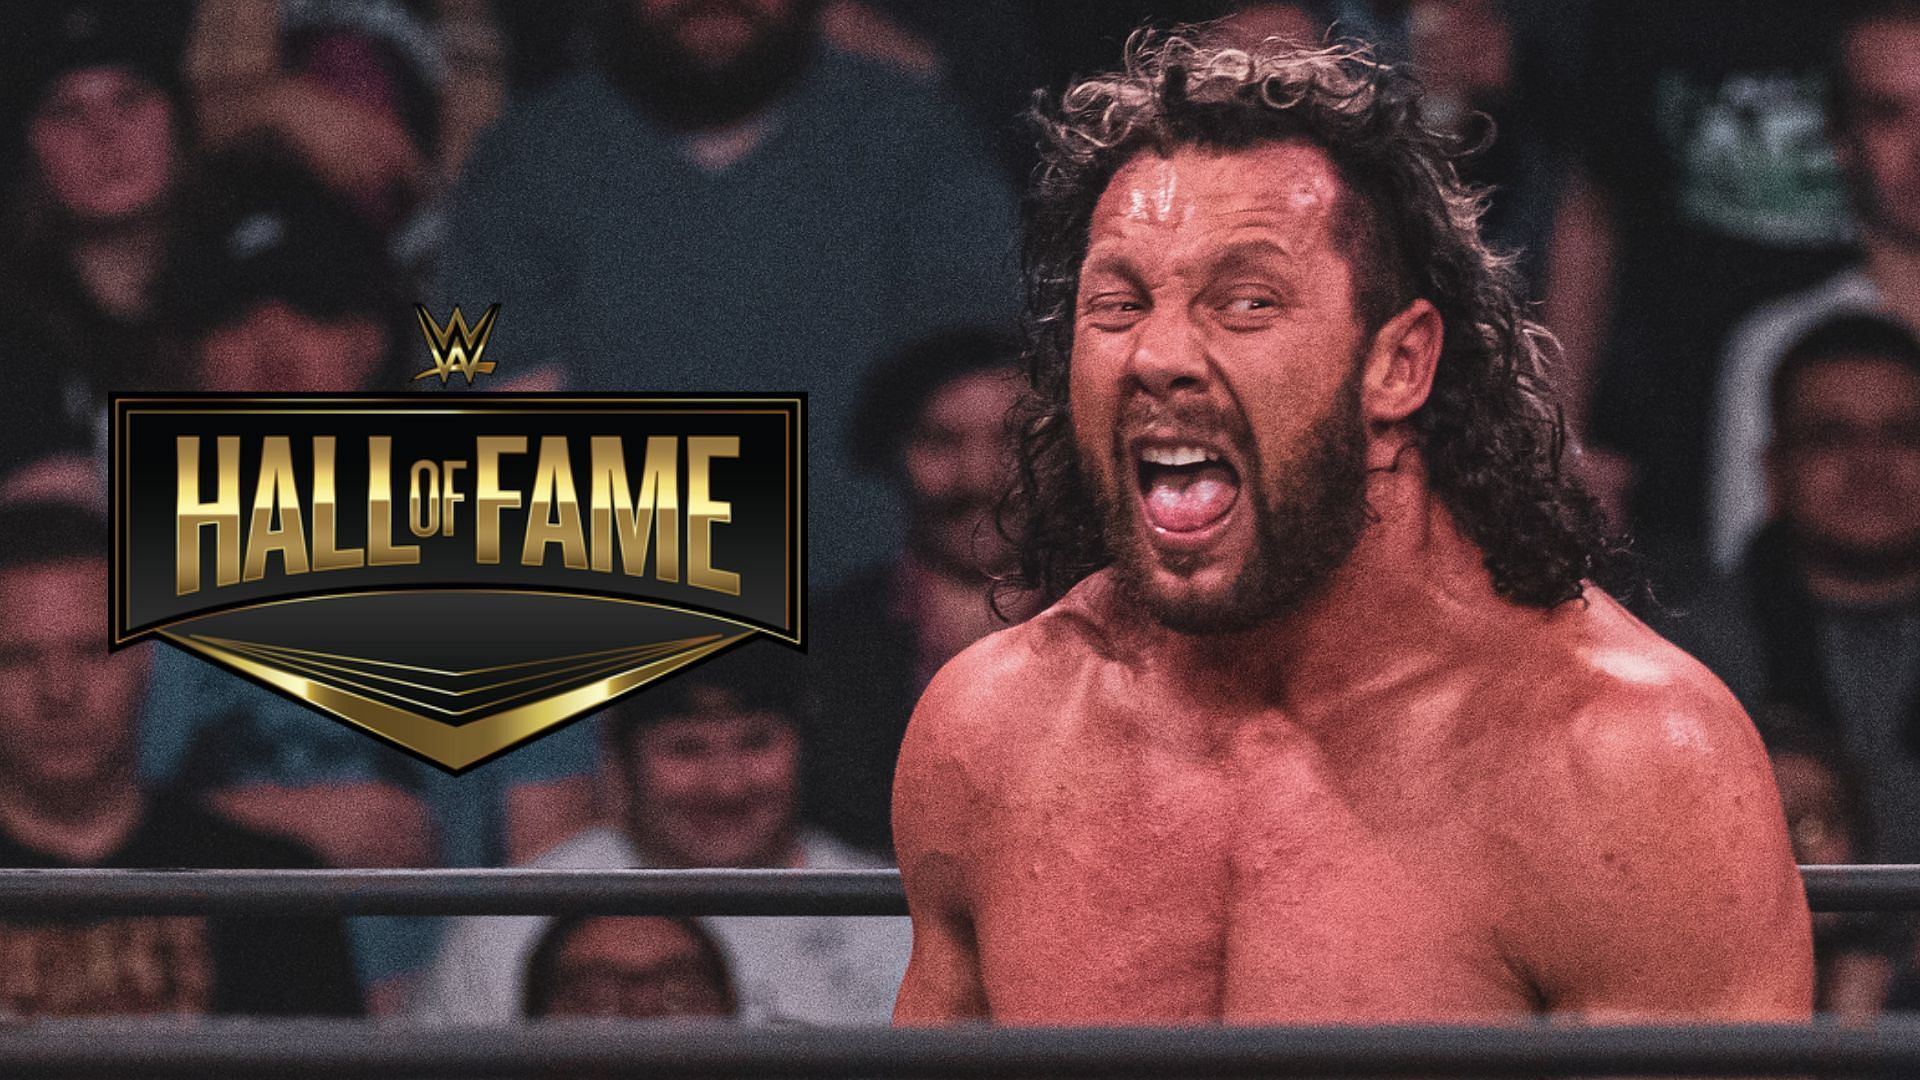 Kenny Omega was heavily influenced by a WWE Hall of Famer